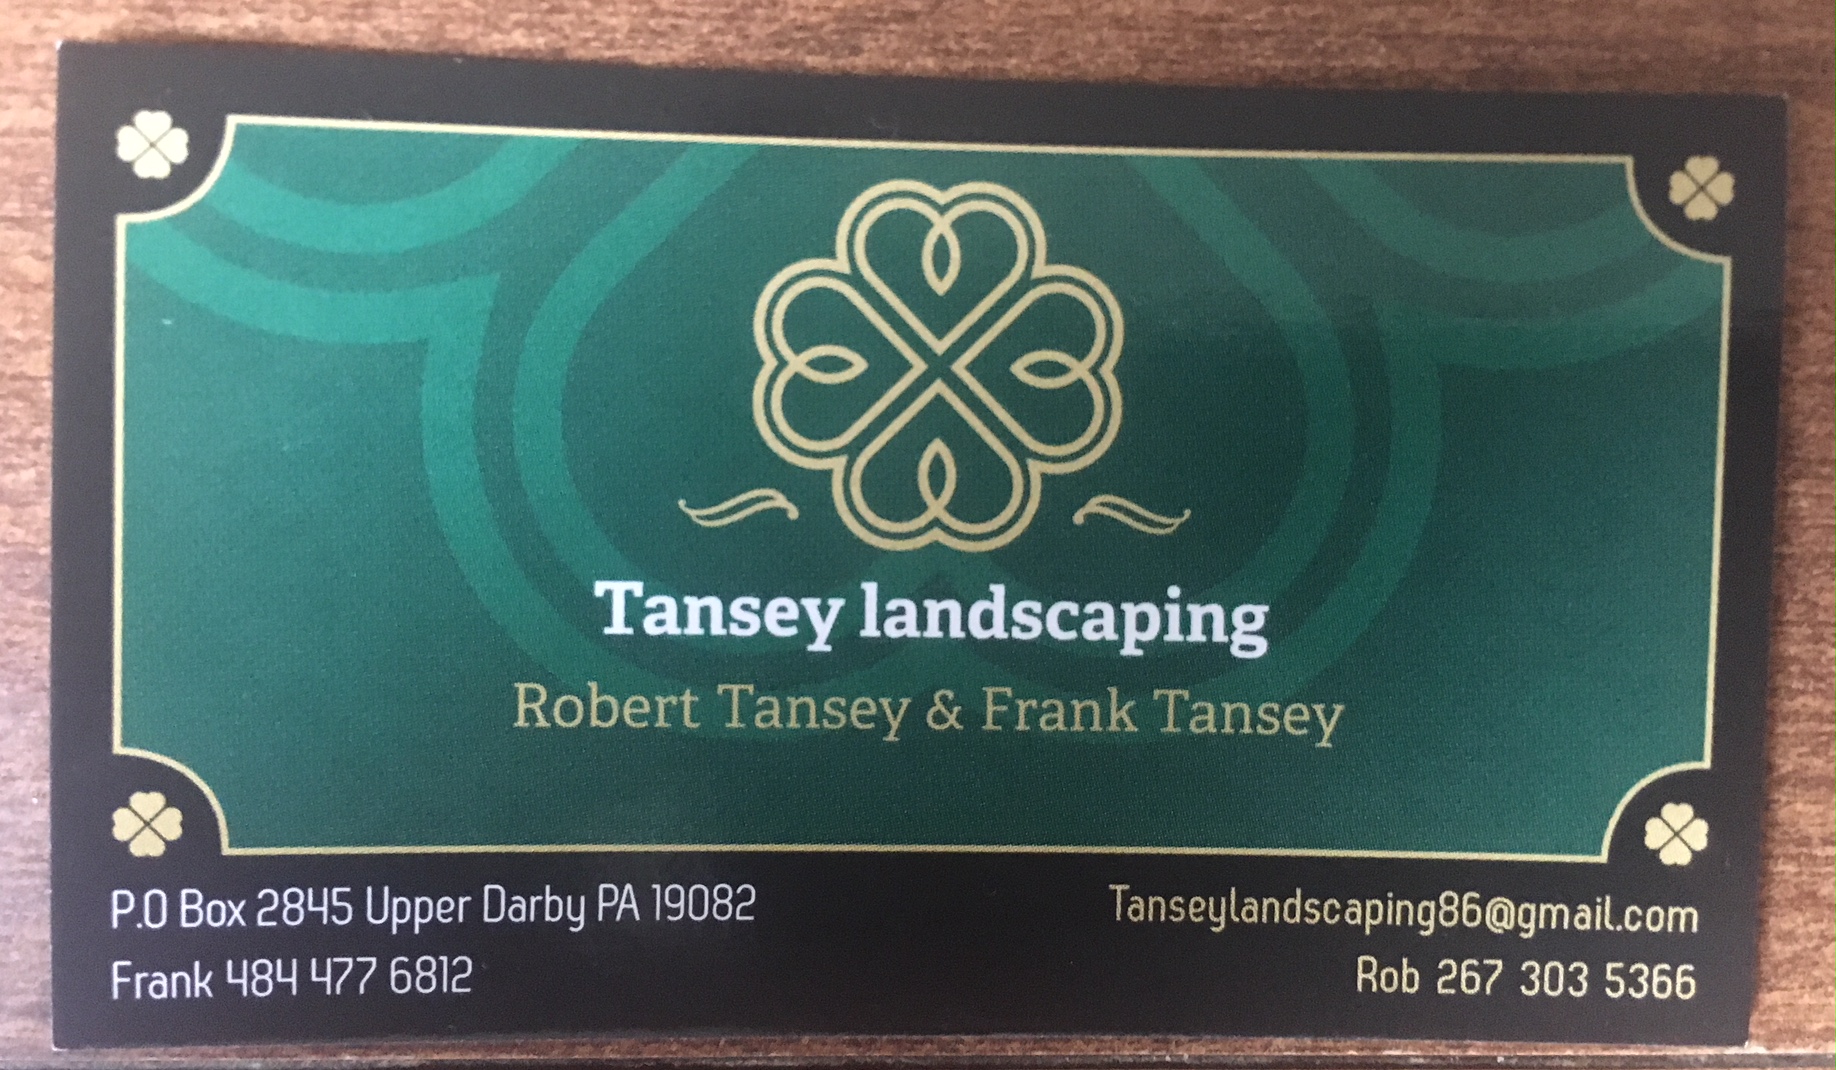 Tansey Landscaping Business Card.jpg